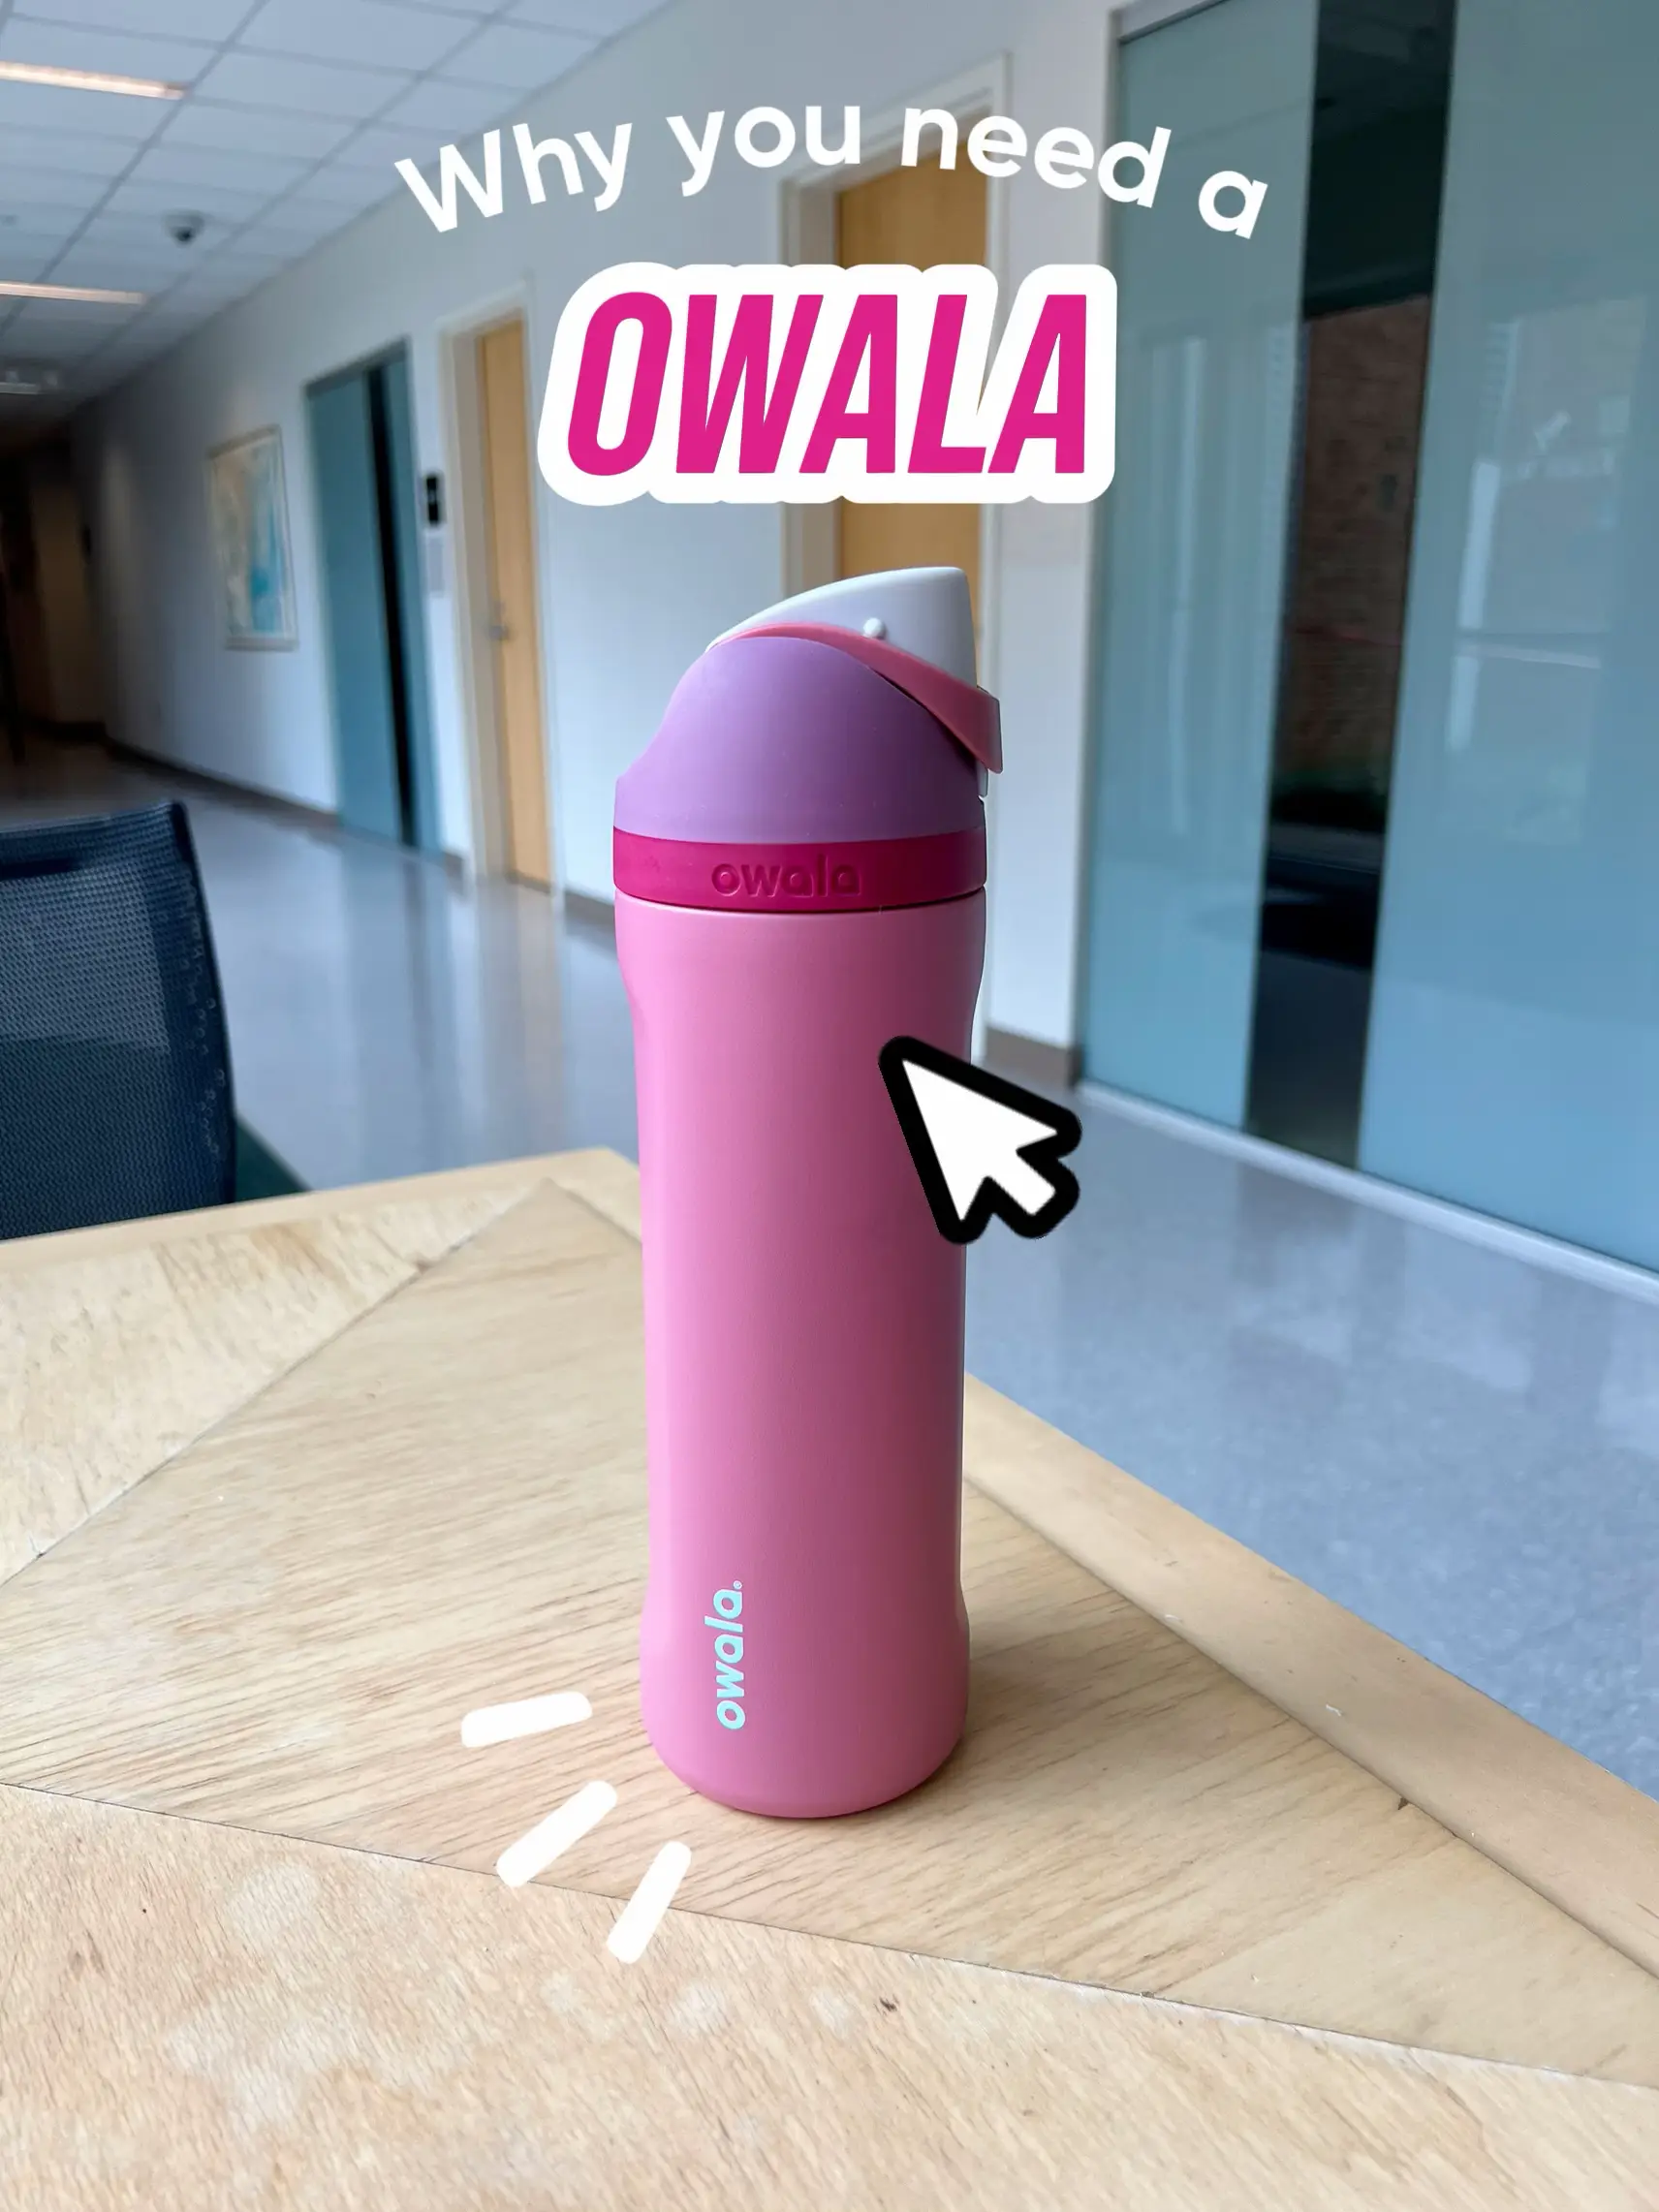 The color schemes 👏🏼👏🏼👏🏼 #owala #waterbottle #owalawaterbottle , Owala Water Bottle